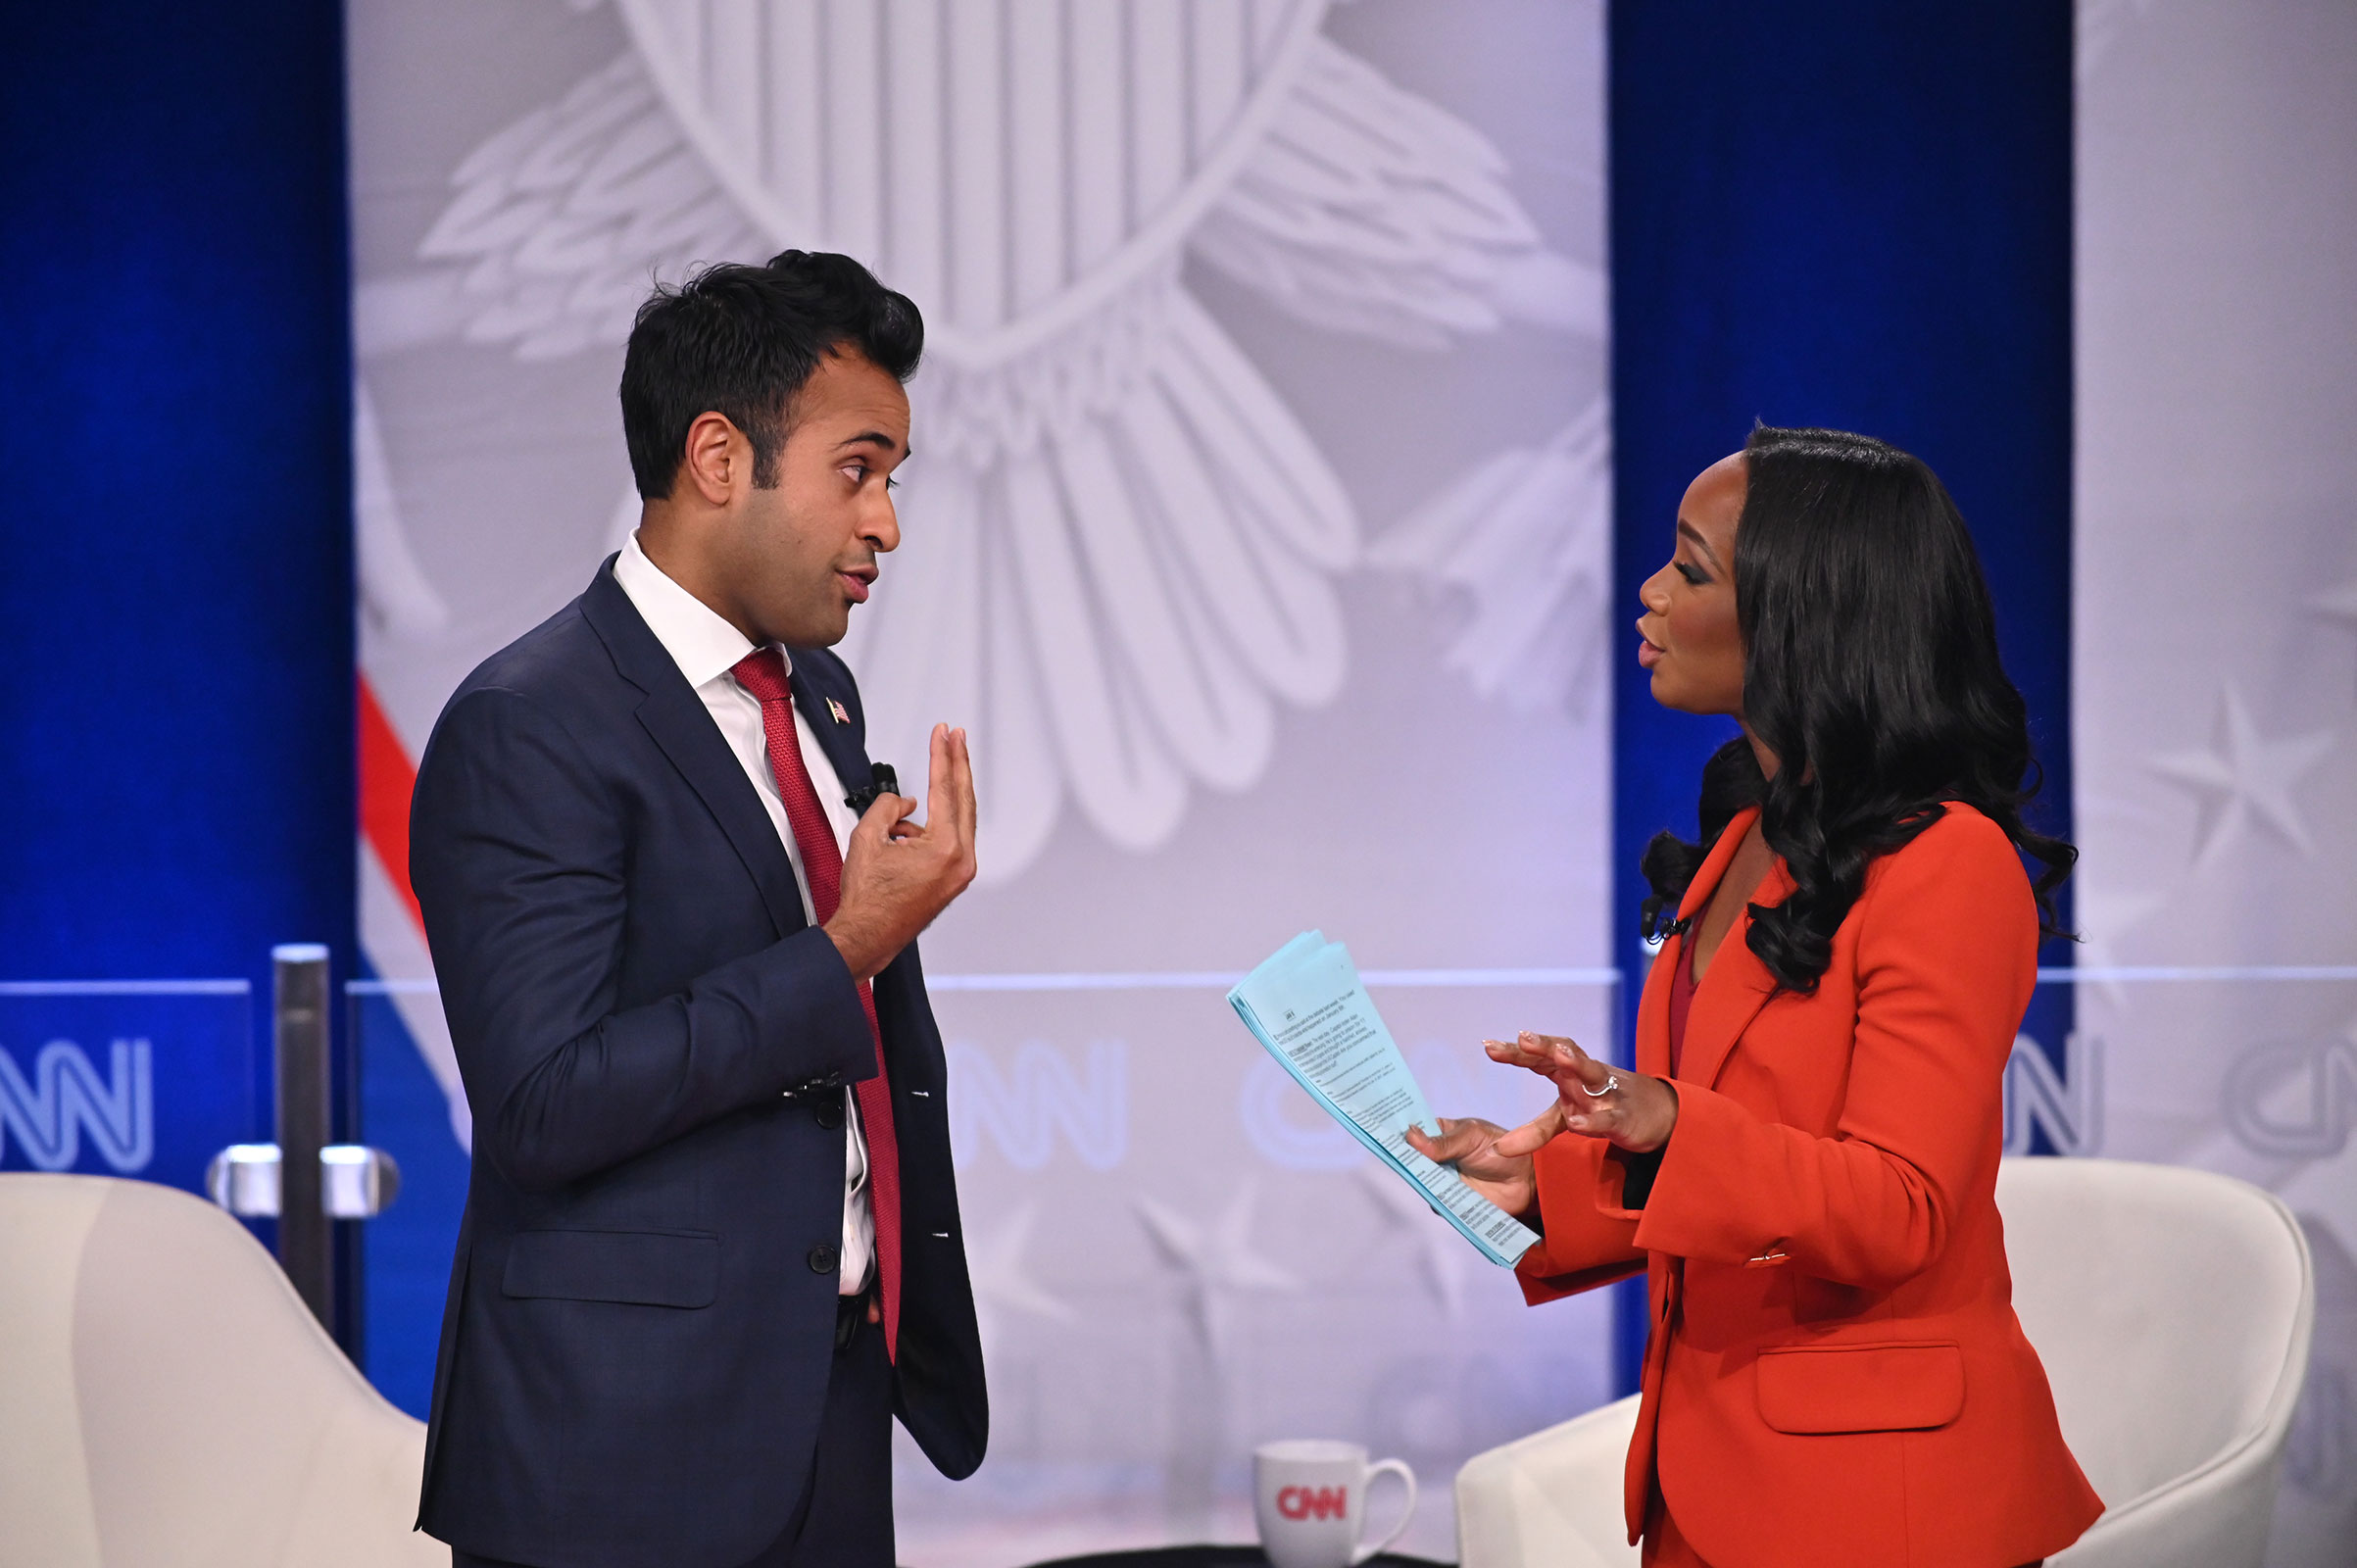 CNN’s Abby Phillip pushes back on an answer from Republican presidential candidate Vivek Ramaswamy during a CNN Republican Town Hall at Grand View University in Des Moines, Iowa, on Wednesday, December 13.